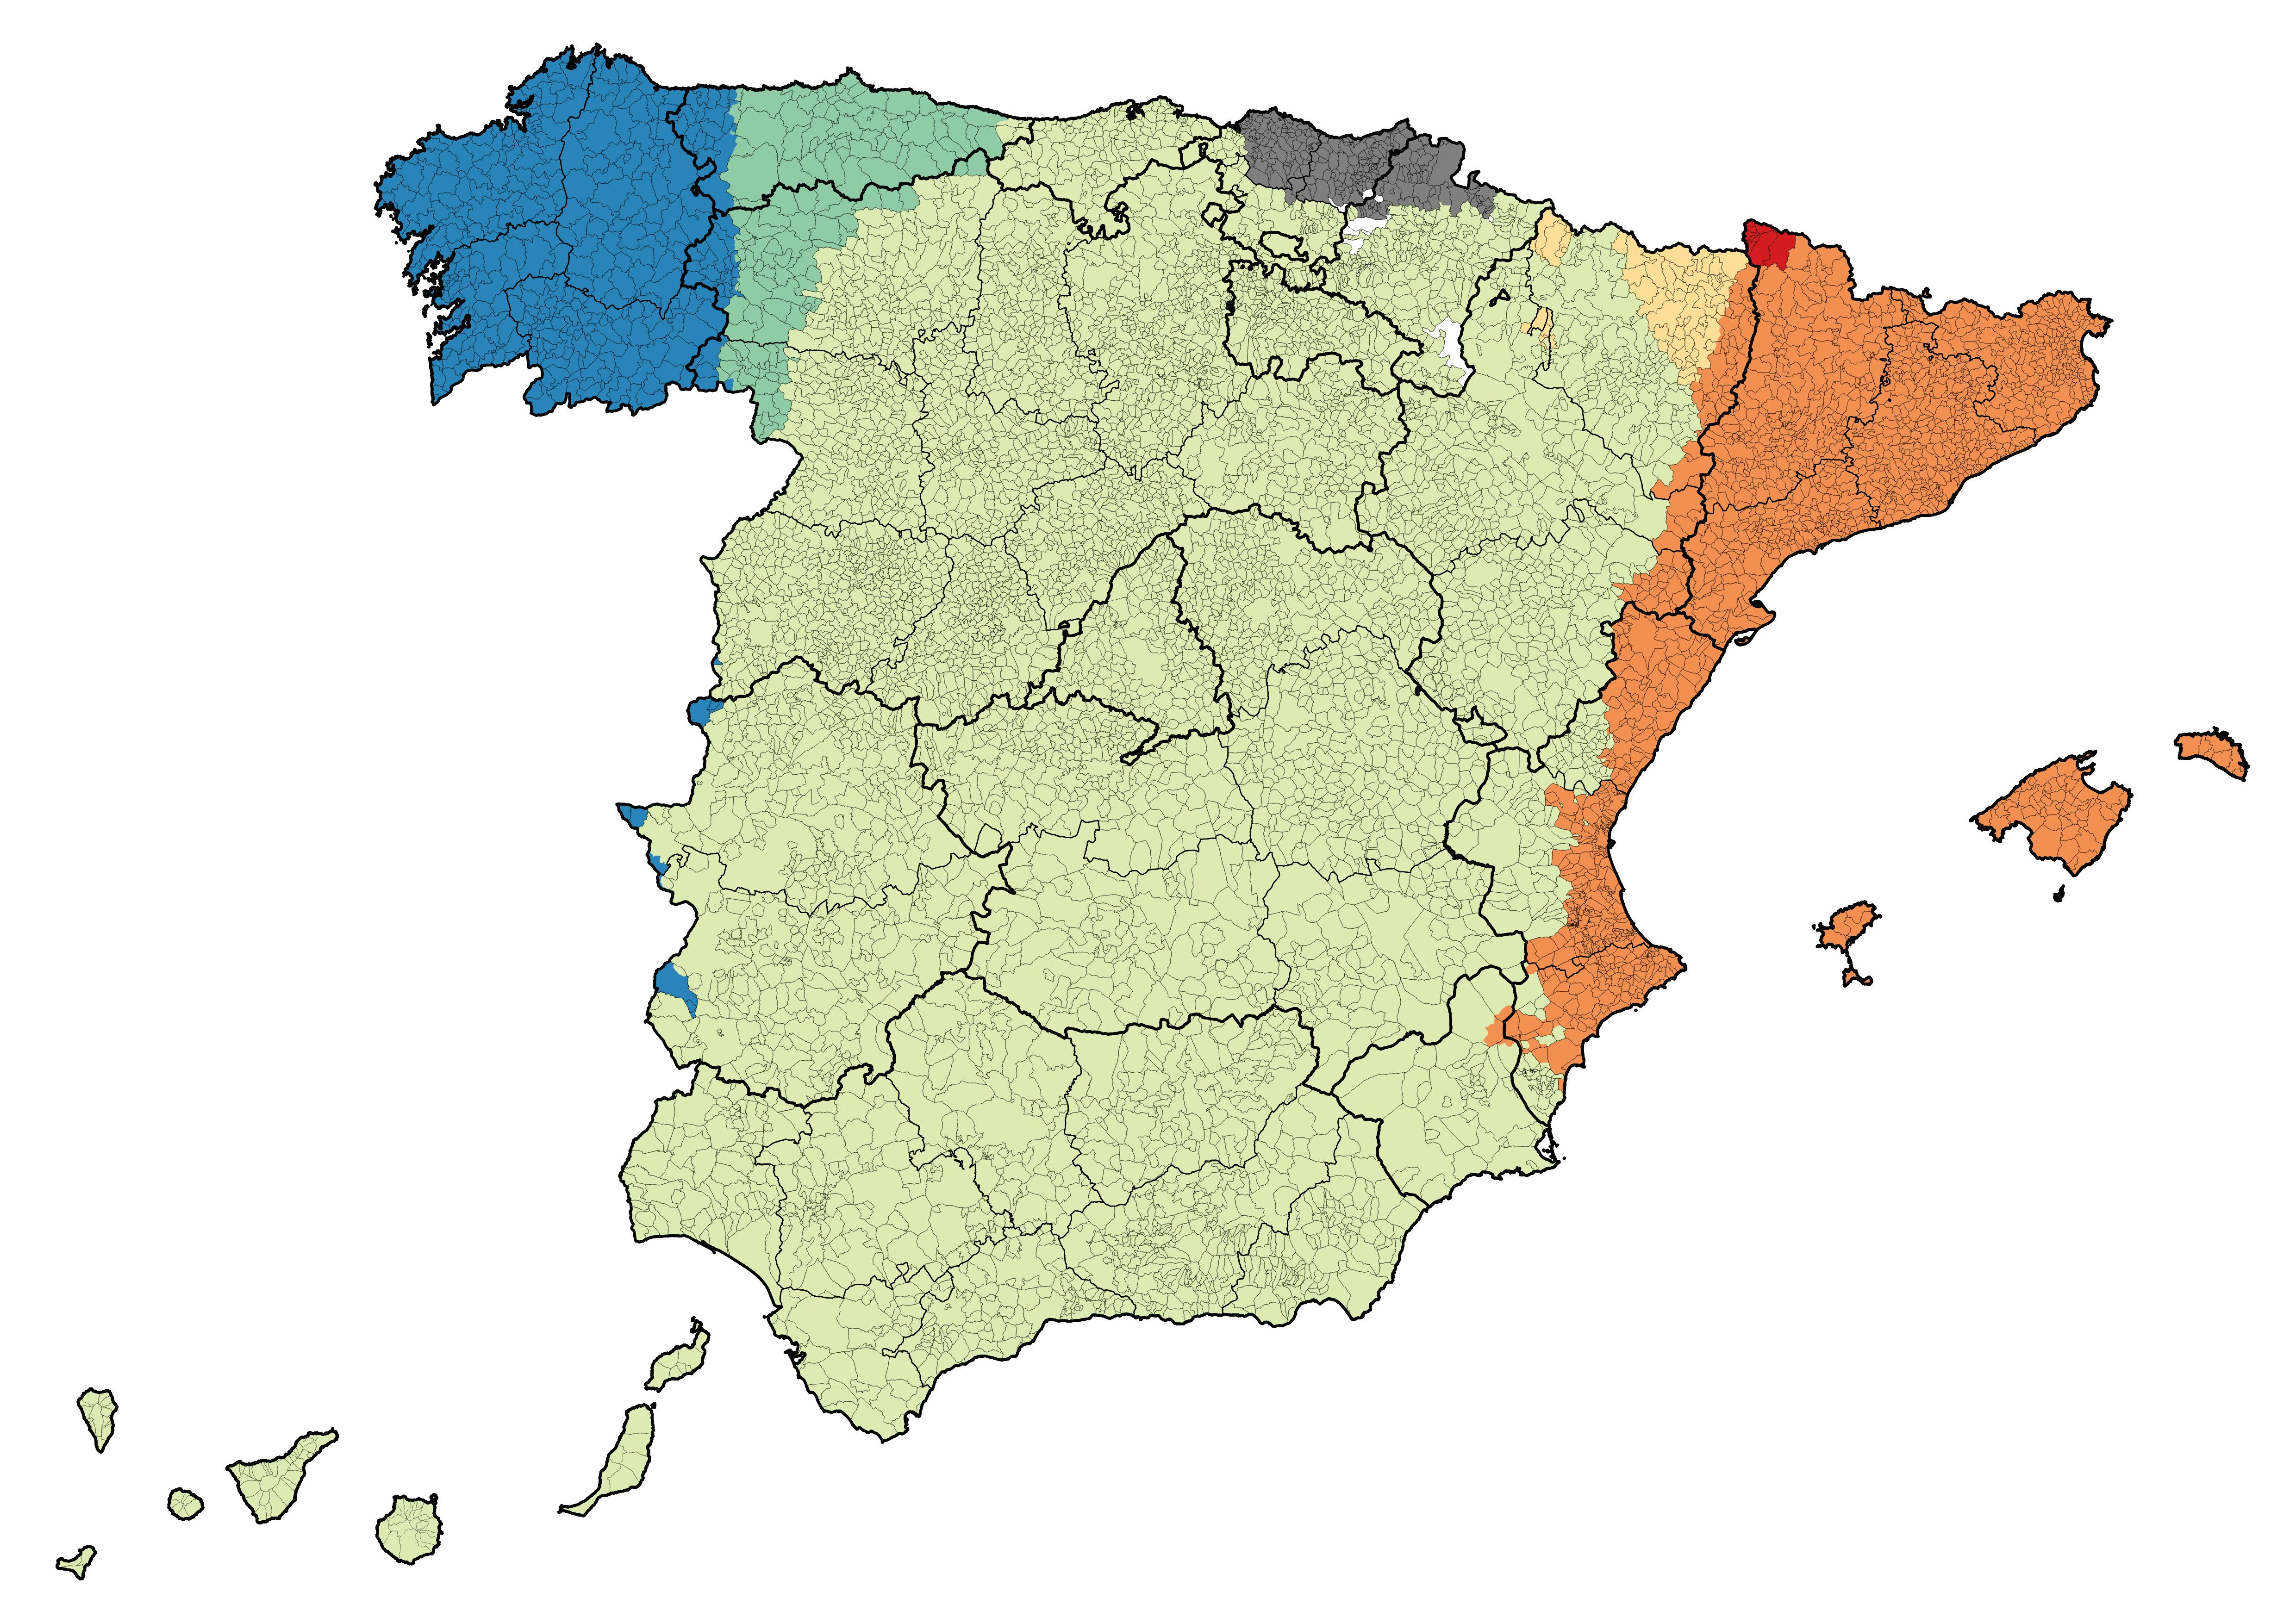 Illustrated map of Spain